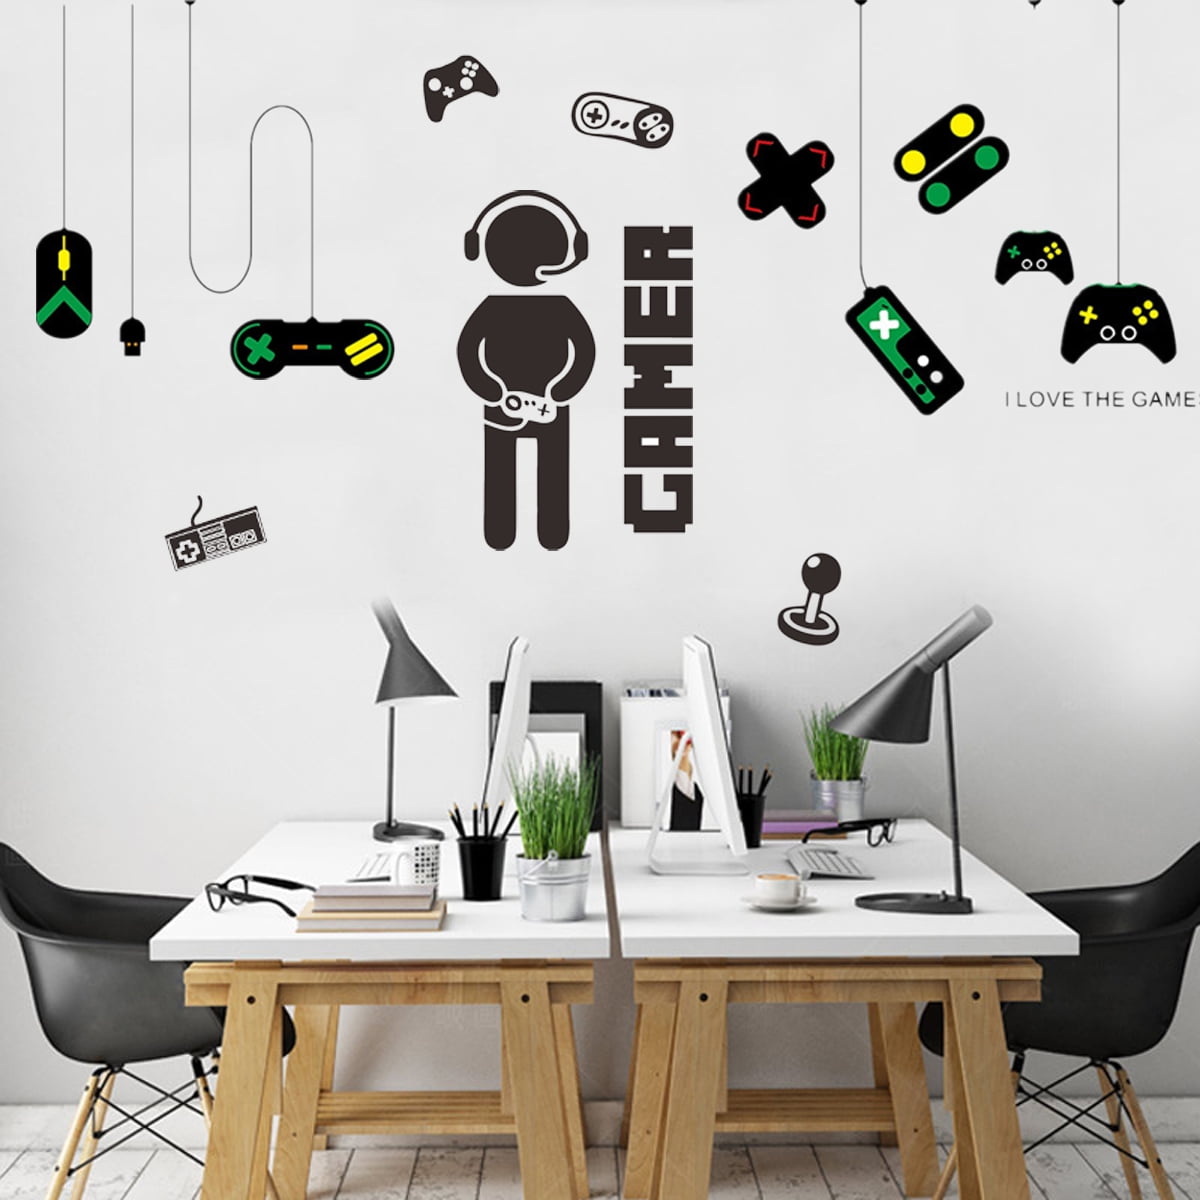 Gamer with Controller and Eat Sleep Game Wall Decal Cool Image Vinyl Stickers Set of 2 Removable Gamer Gamepad Art DIY Quote Sticker Mural for Kids Room Playroom Bedroom Livingroom Home Decoration